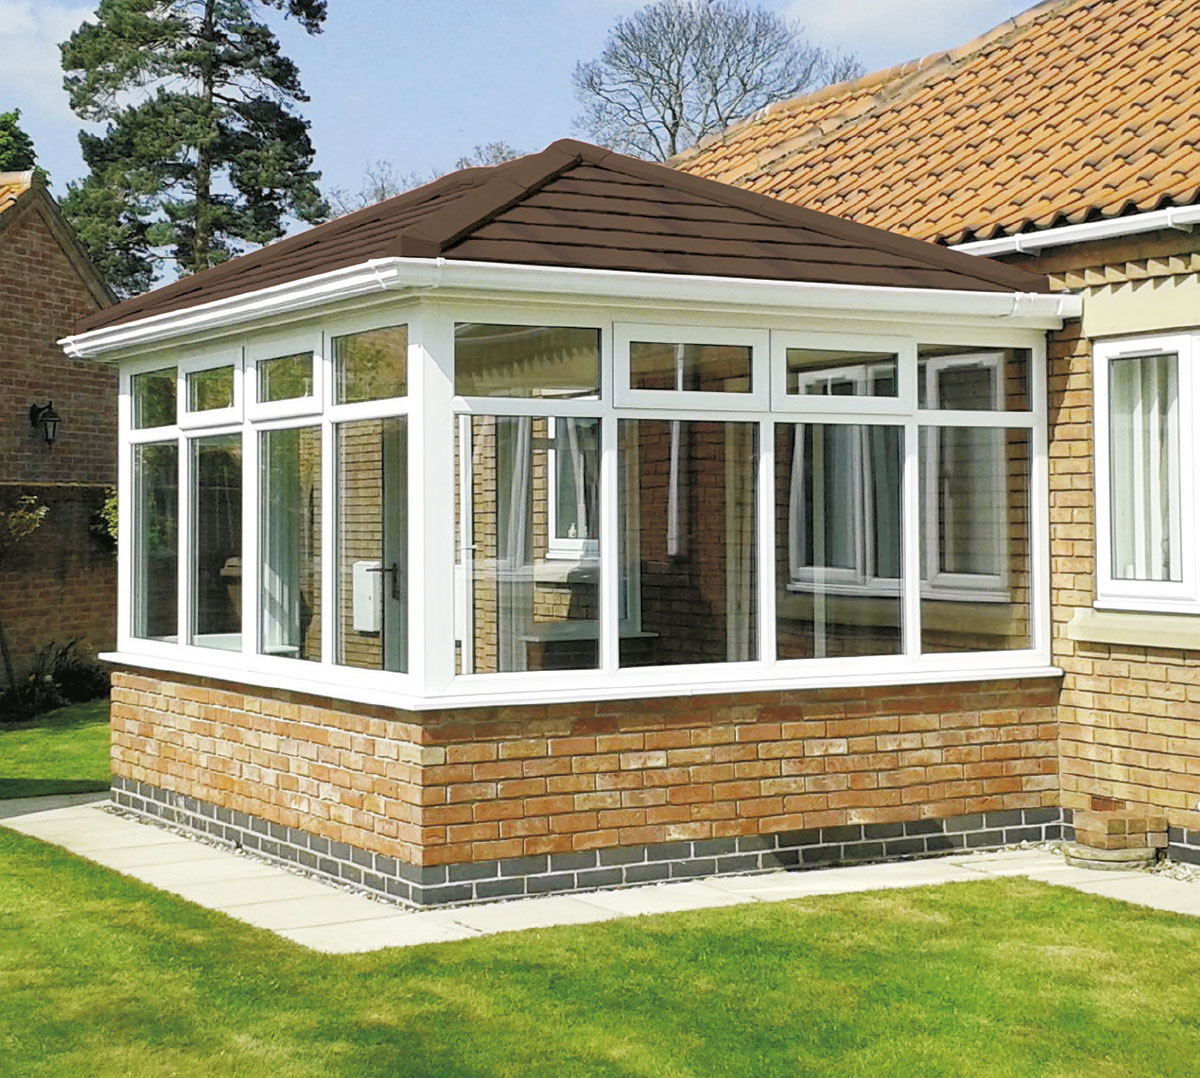 An example of replacement windows for conservatories north east.